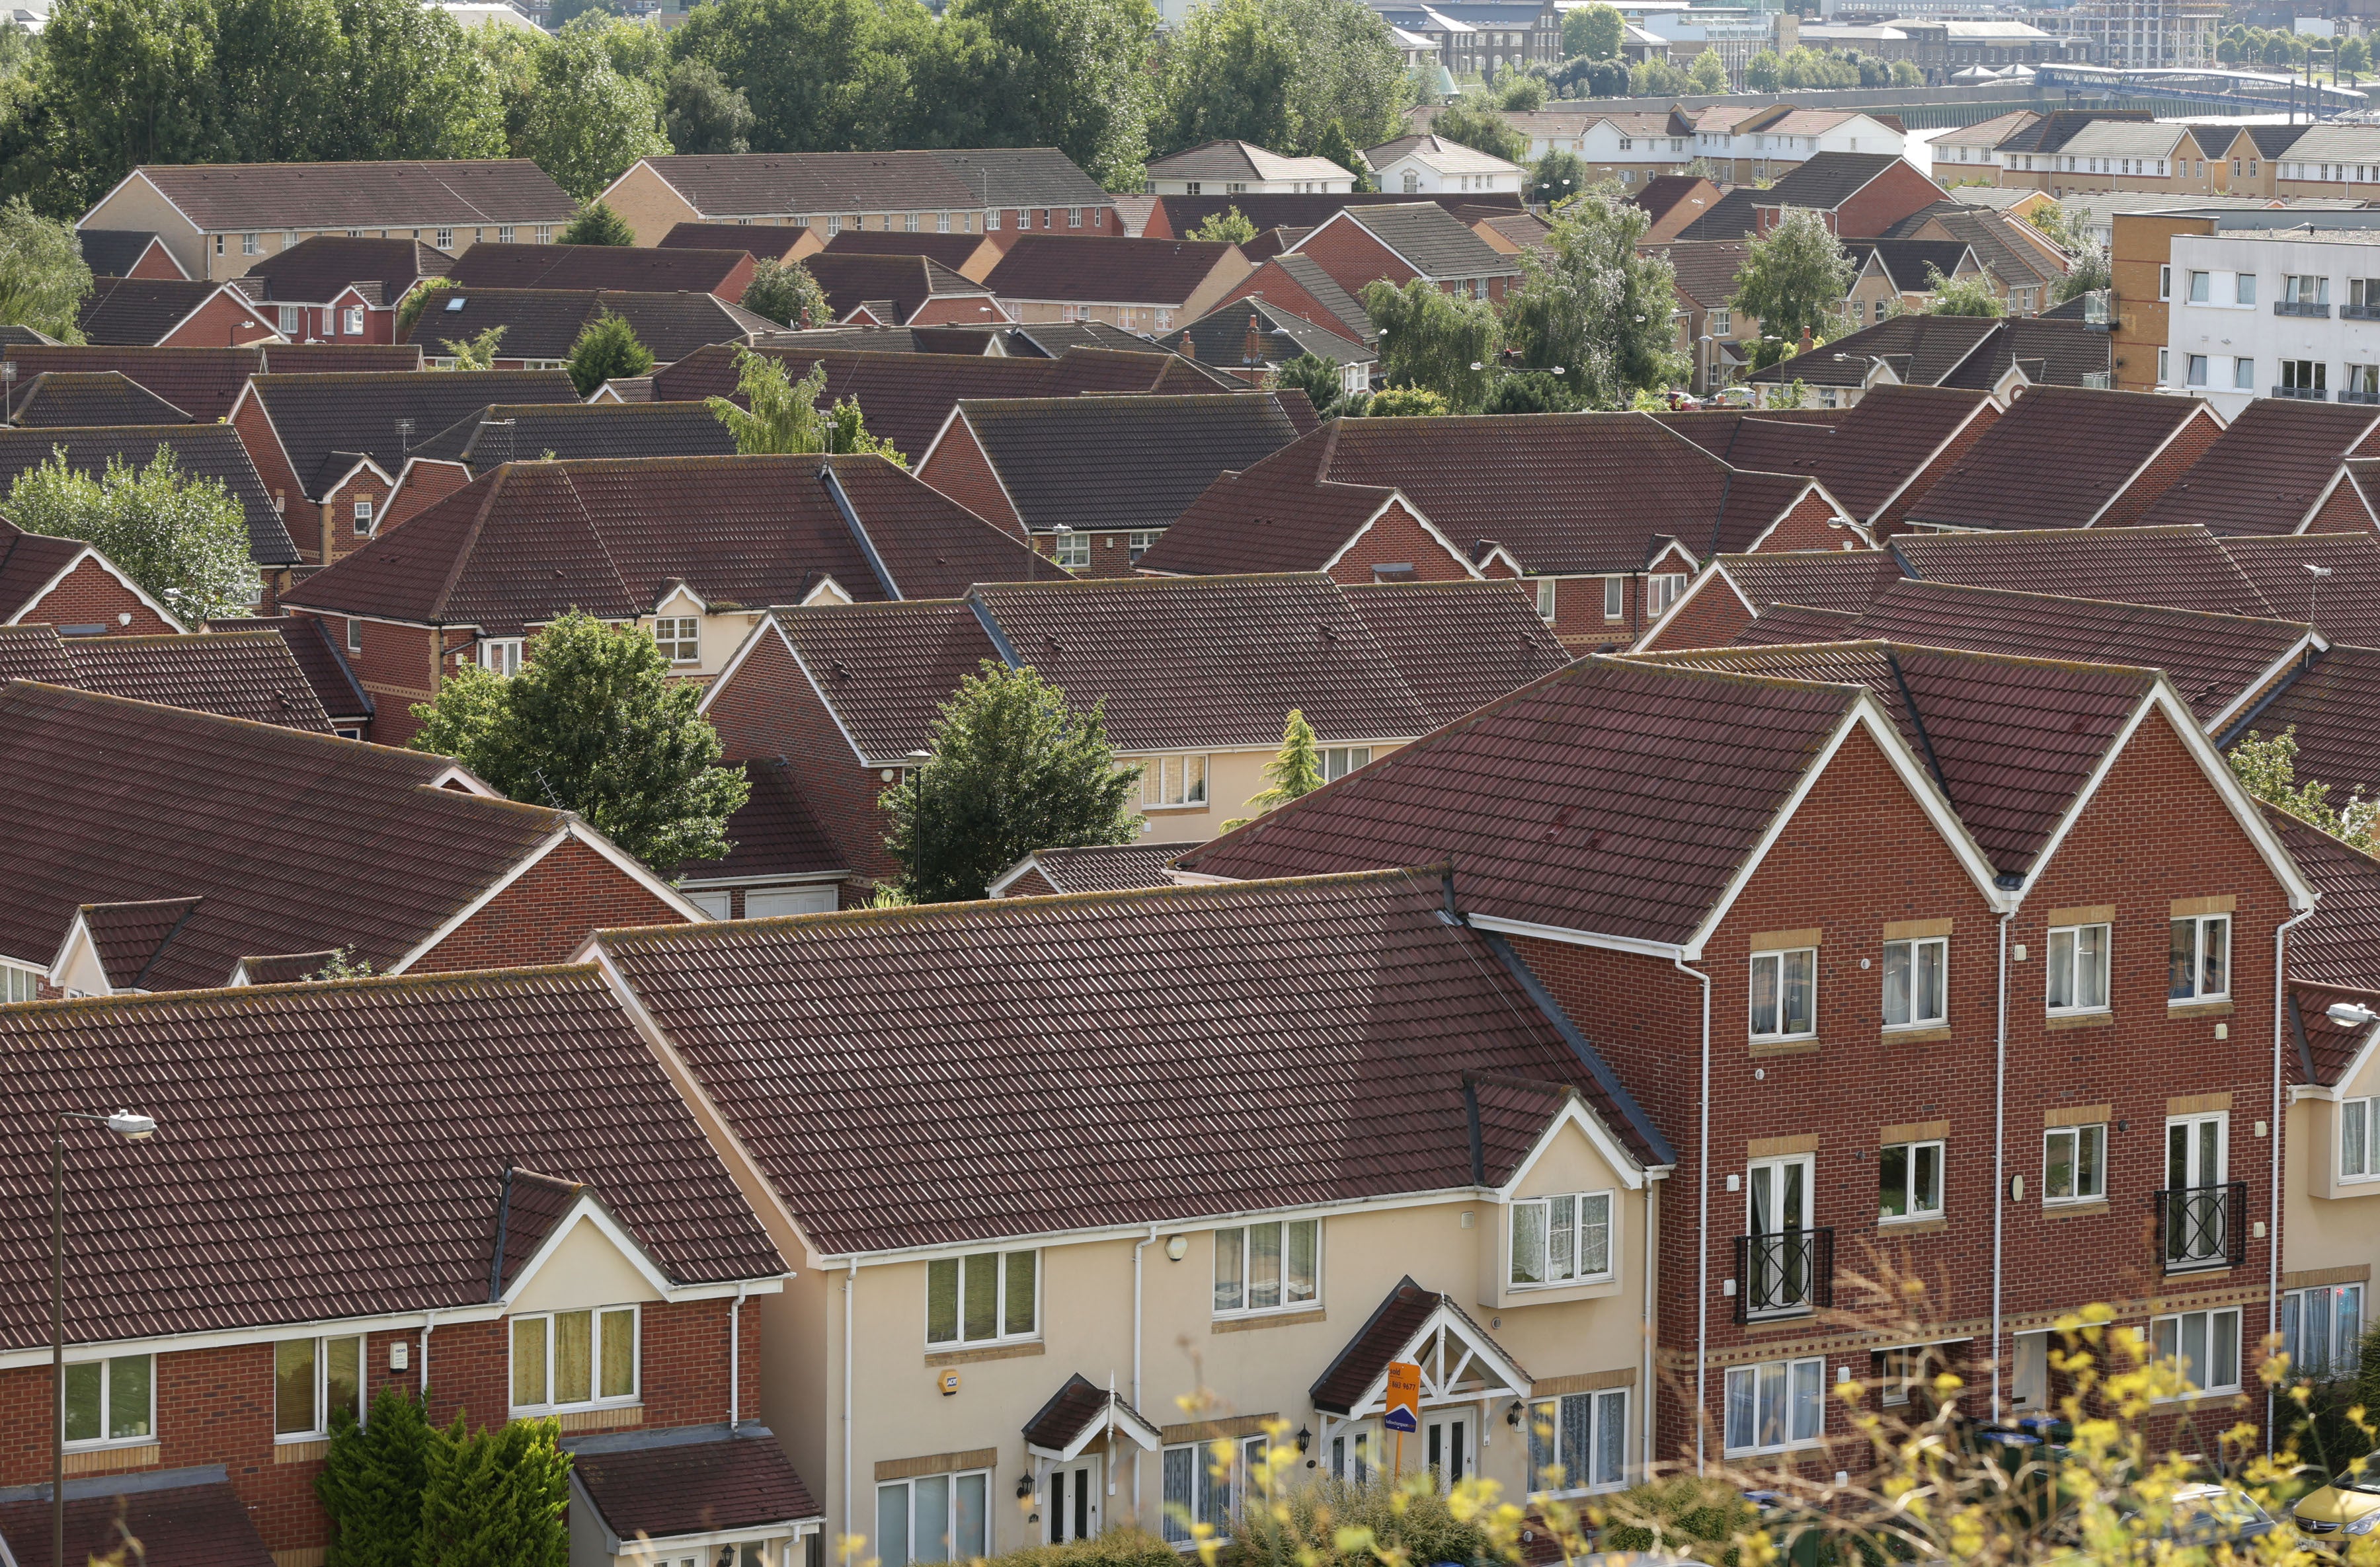 The choice of homes on the market is starting to pick up, Zoopla has reported